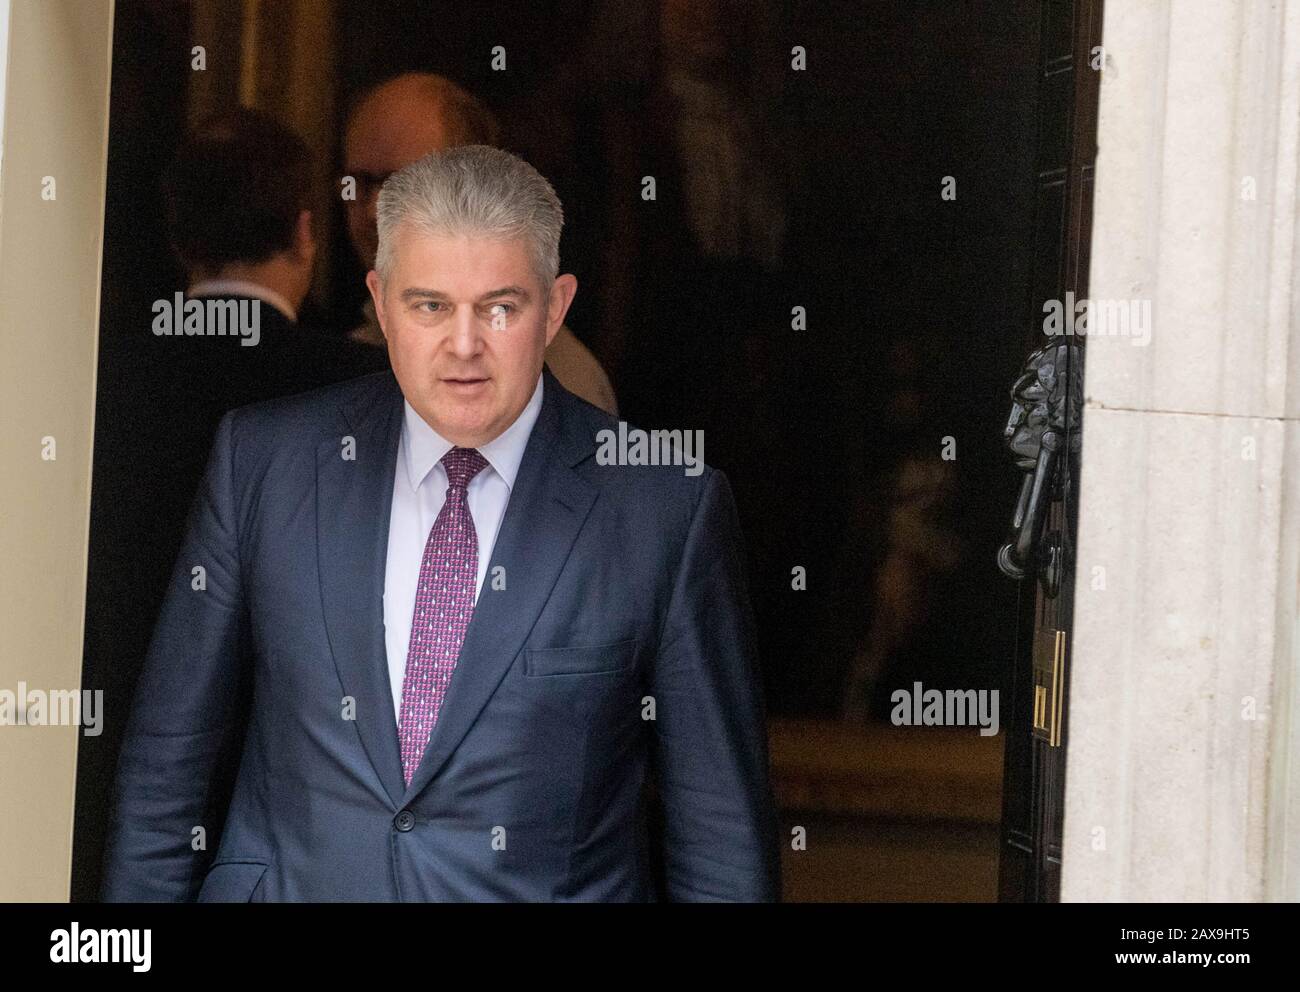 London, UK. 11th Feb, 2020. Brandon Lewis MP PC Minister for Security leaves a special Cabinet meeting to discuss HS2 at 10 Downing Street, London Credit: Ian Davidson/Alamy Live News Stock Photo